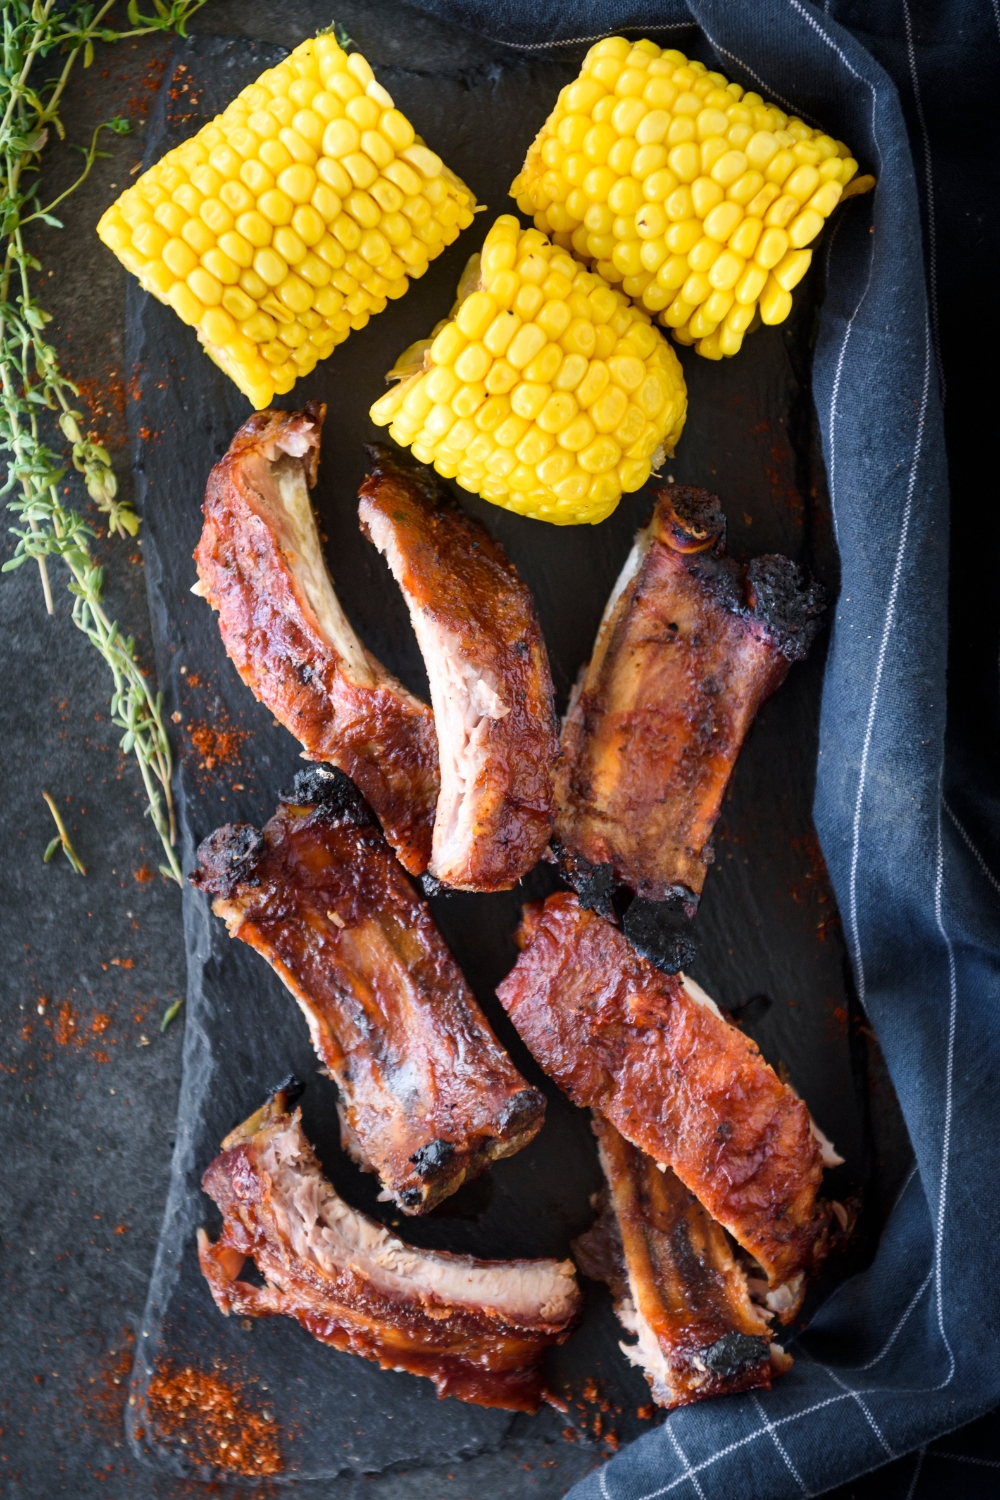 A pile of ribs covered in BBQ sauce on a black platter with three sliced corn cobs.